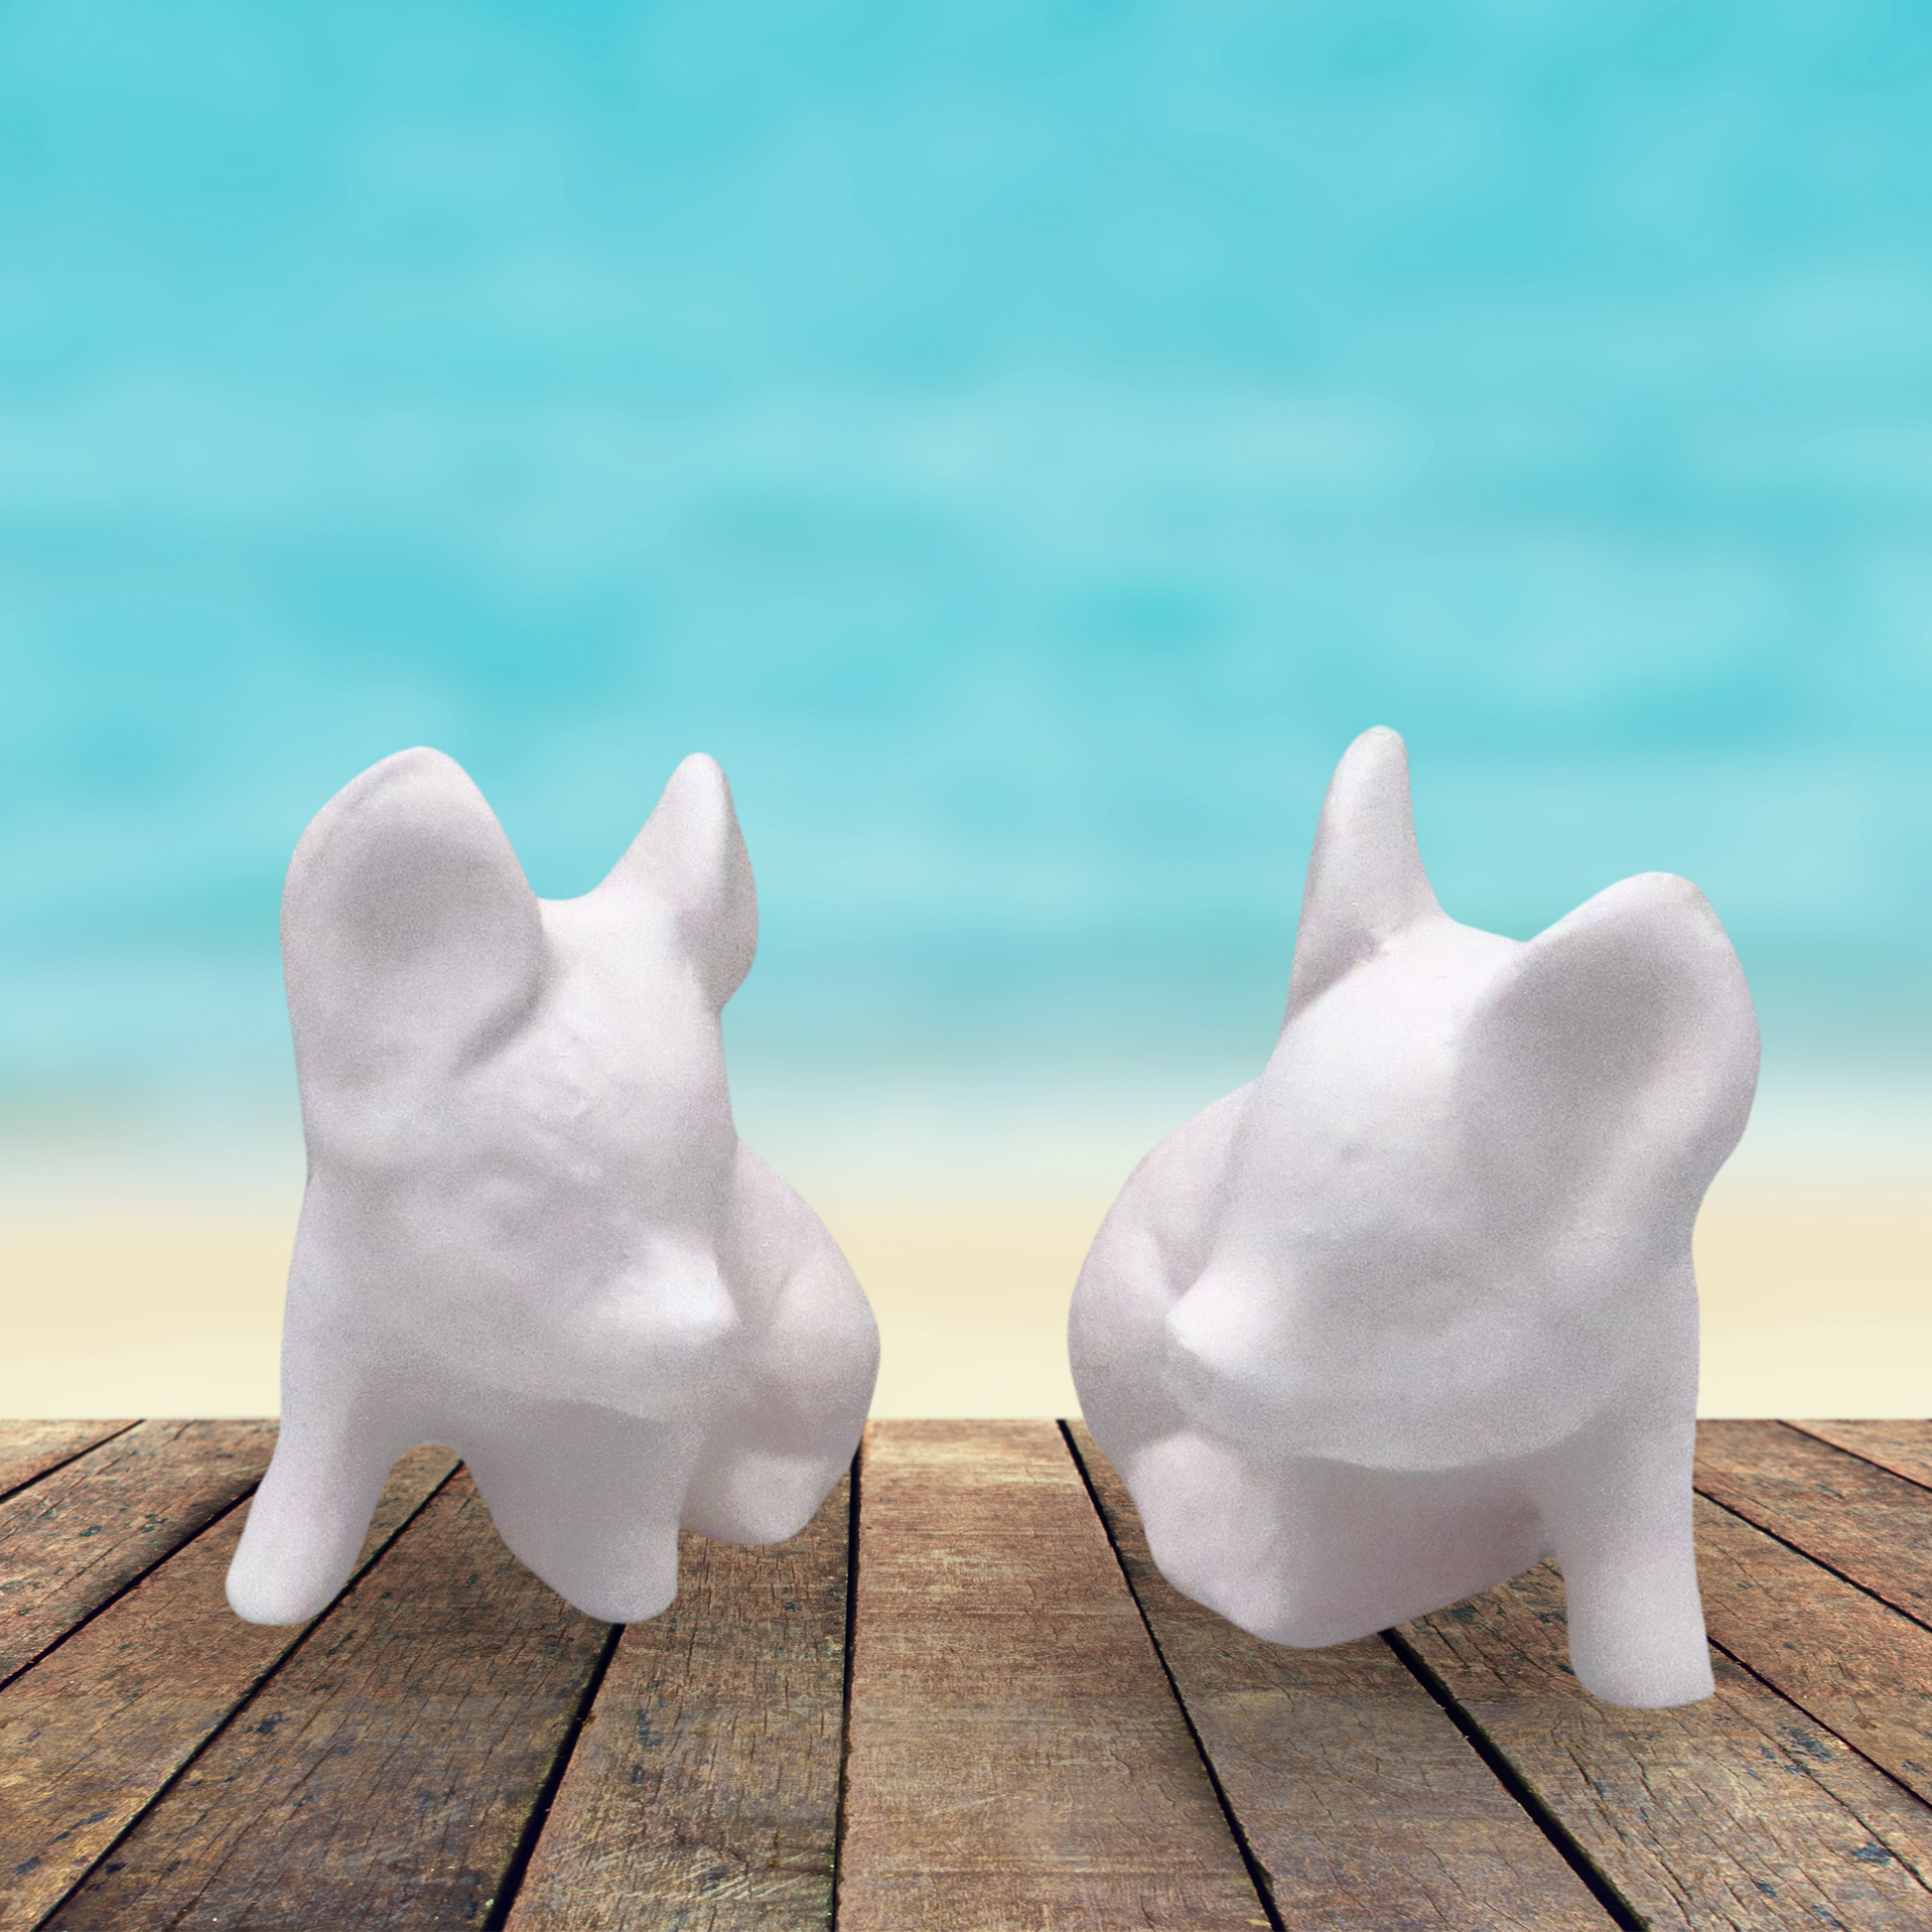 2 little unpainted ceramic pig figurines sitting on a rustic wooden table by the beach.